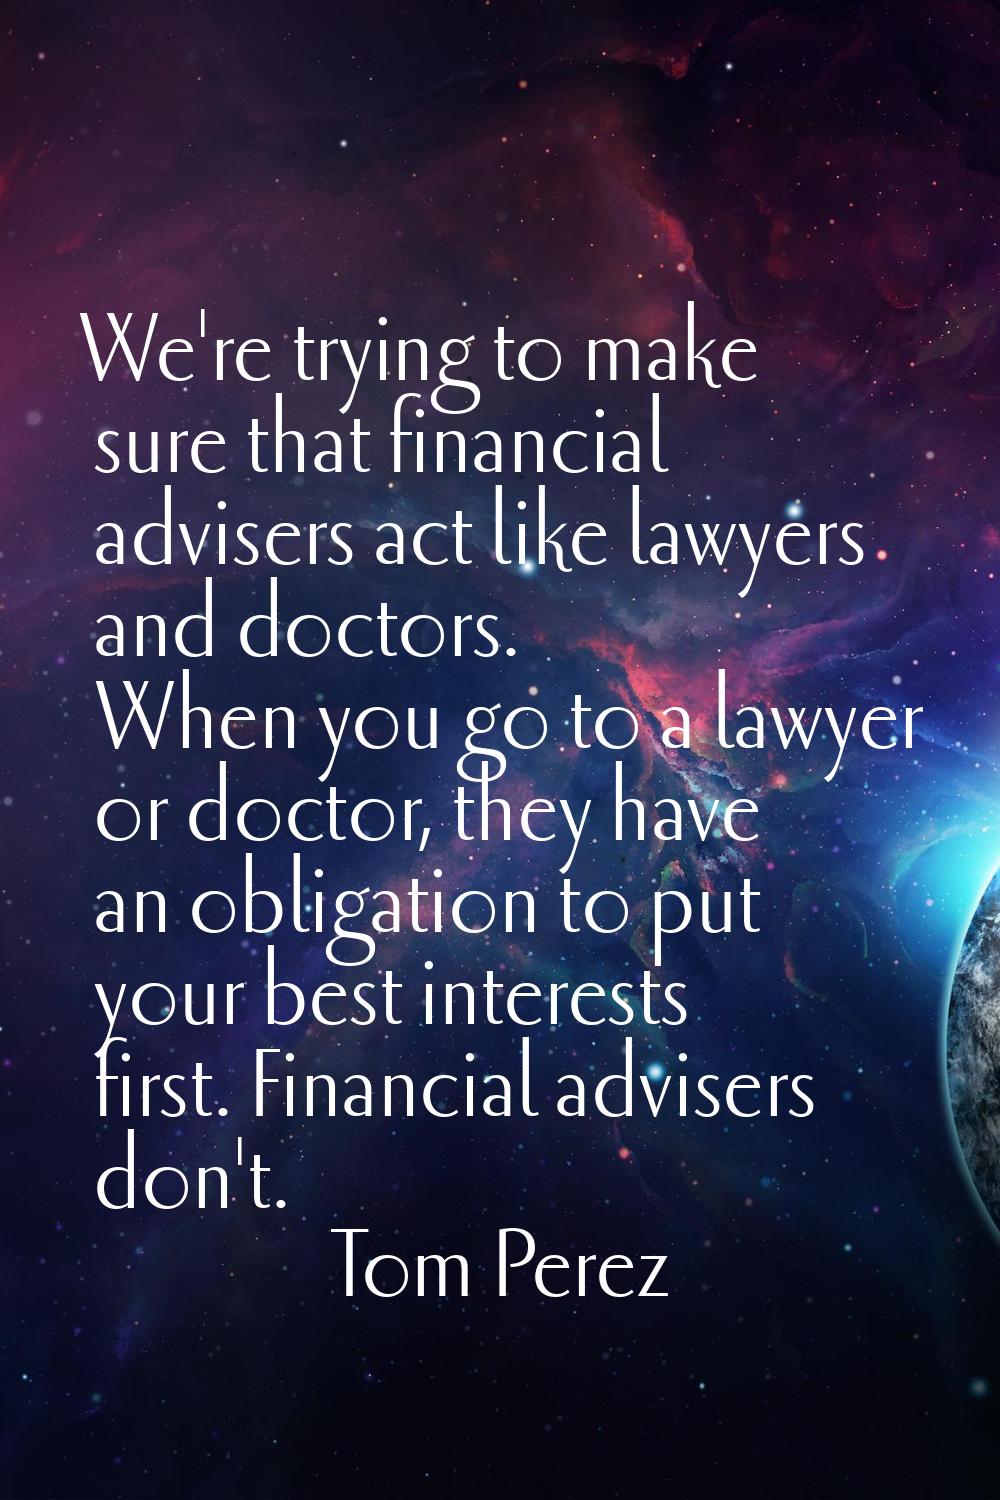 We're trying to make sure that financial advisers act like lawyers and doctors. When you go to a la